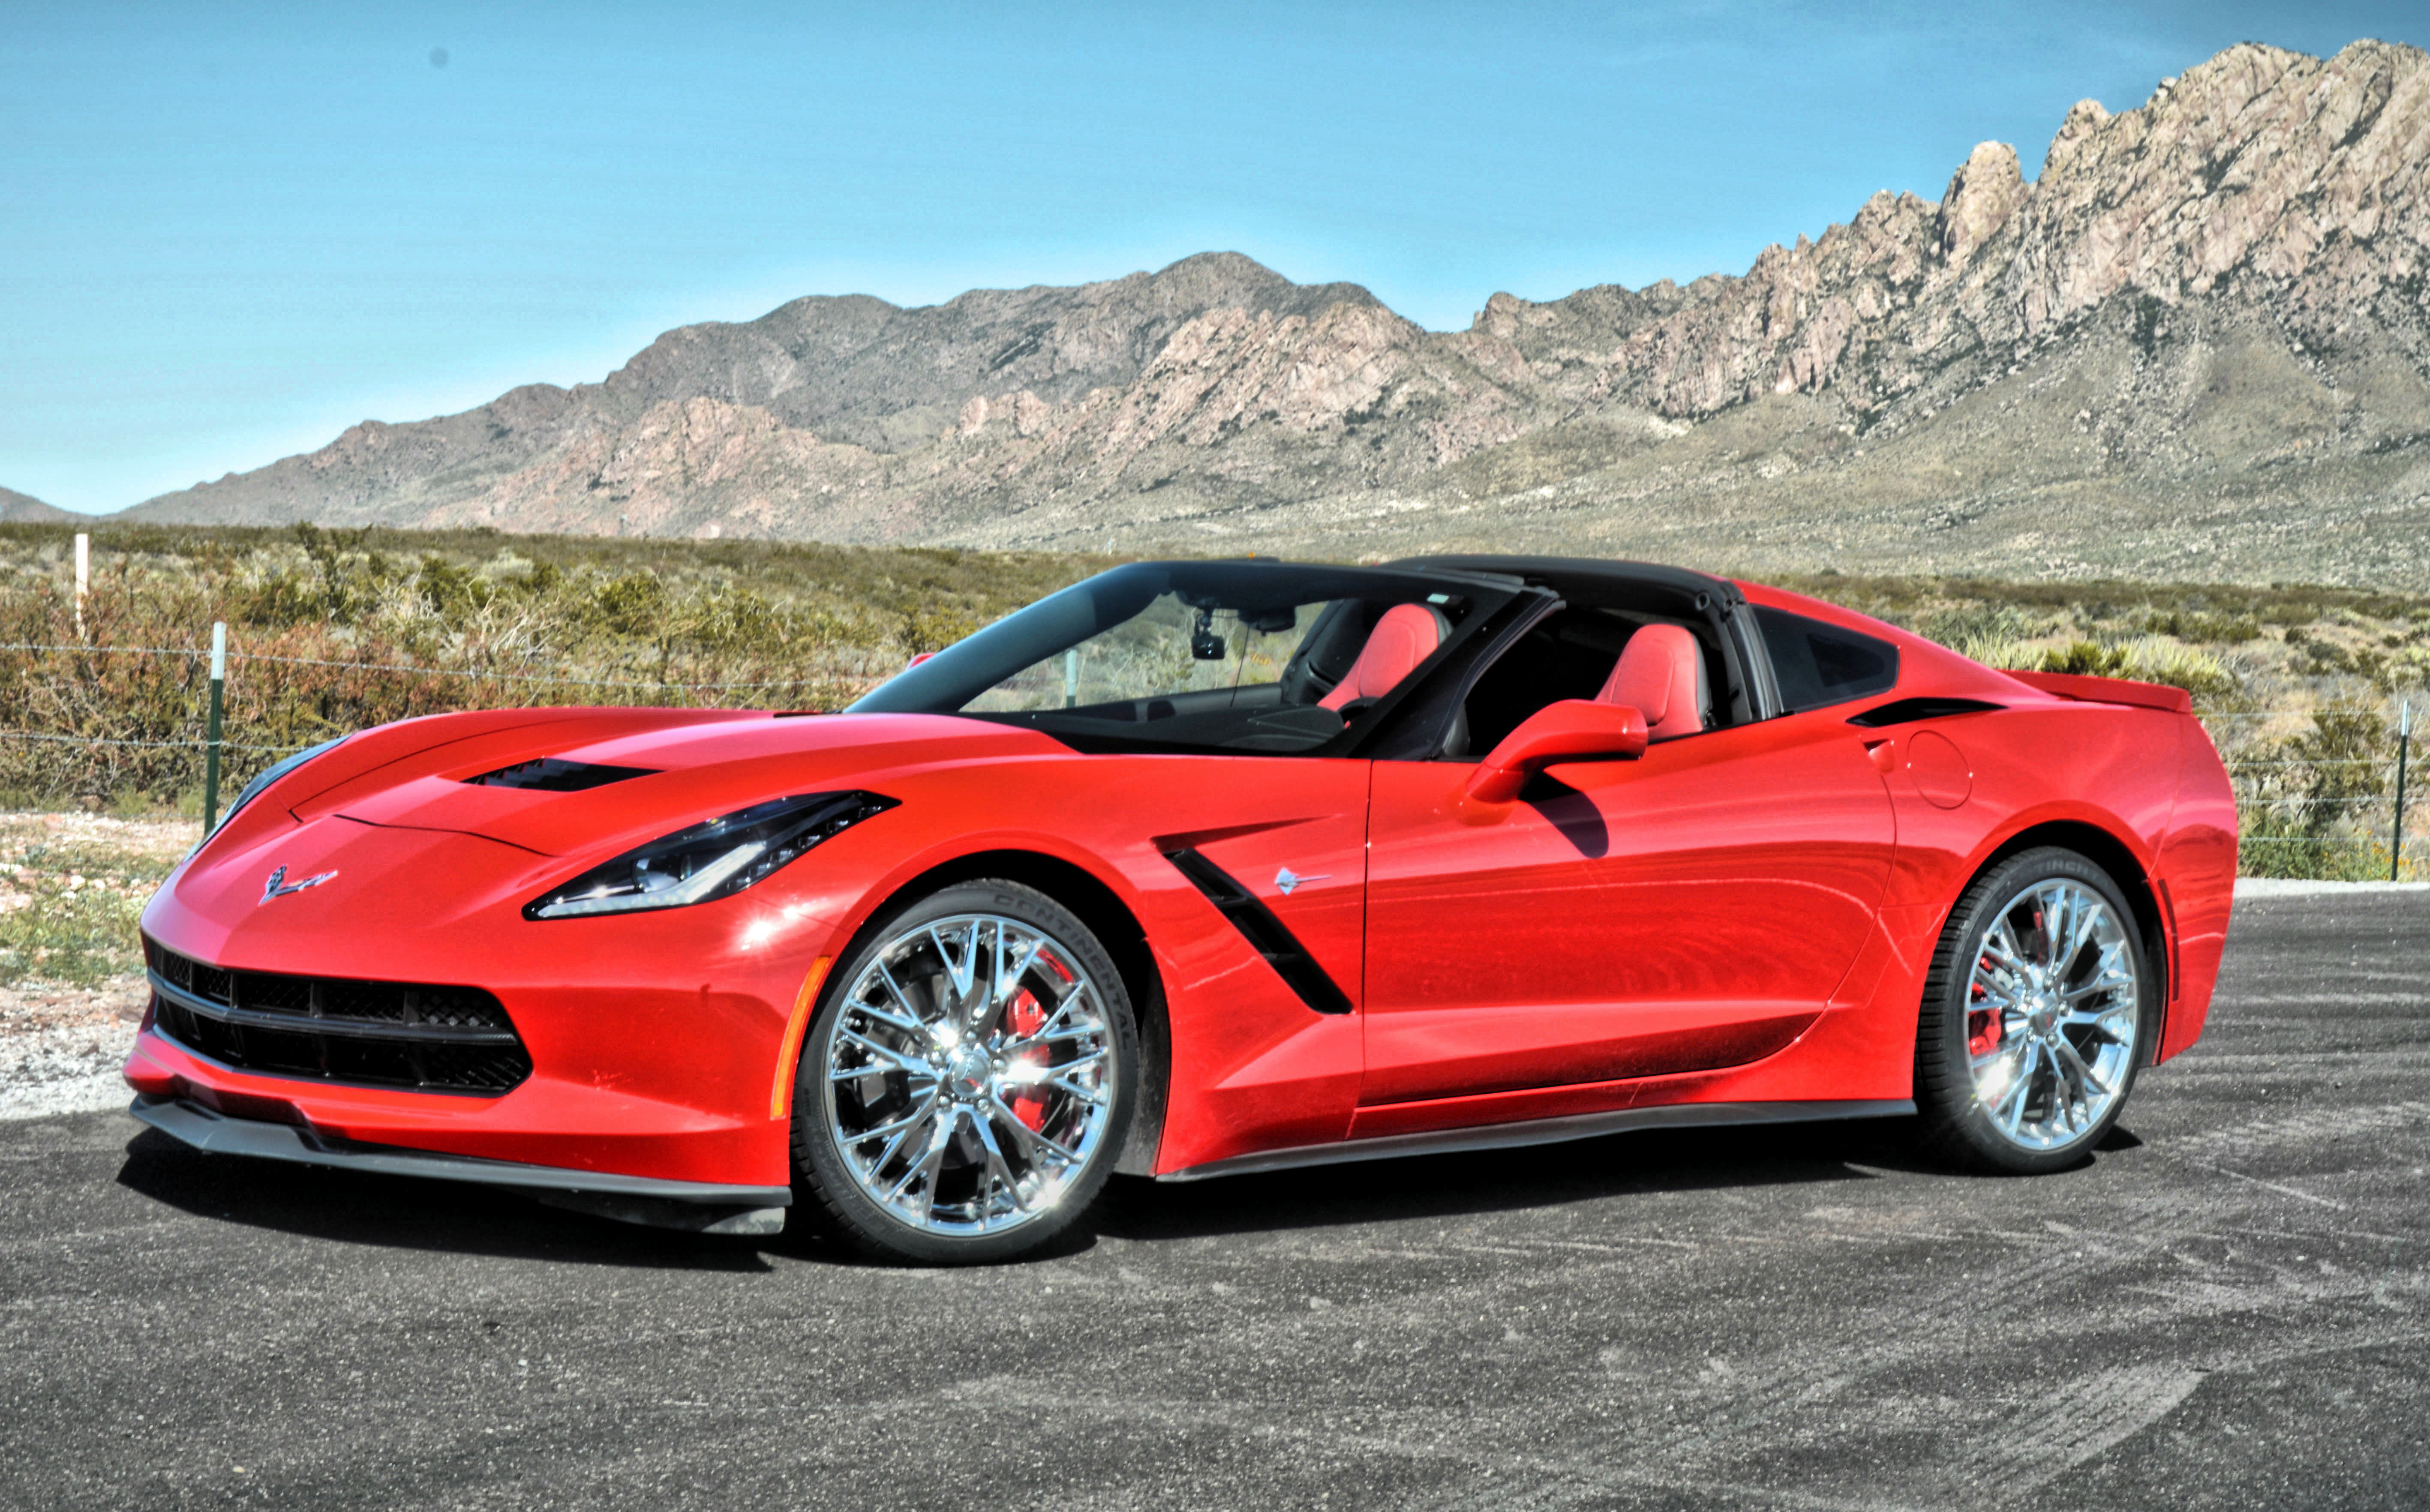 Going Topless Today With The C Corvetteforum Chevrolet Corvette Forum Discussion